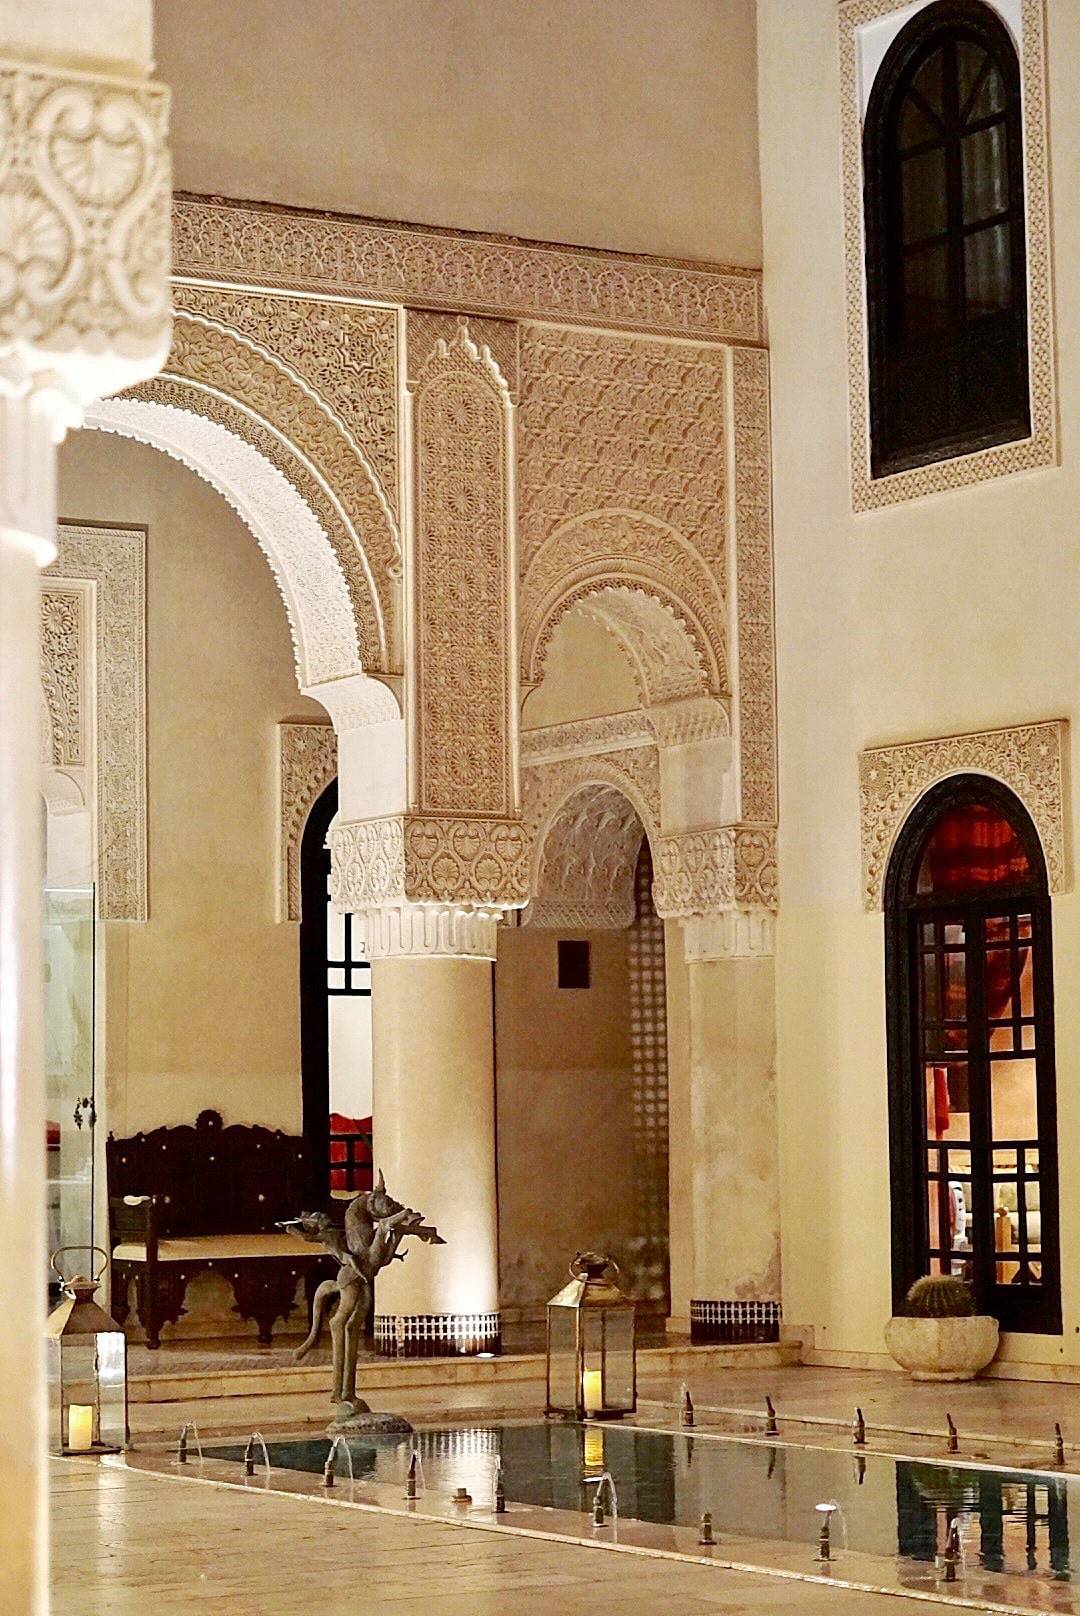 Riad Fes Hotel in the heart of Fes, Morocco